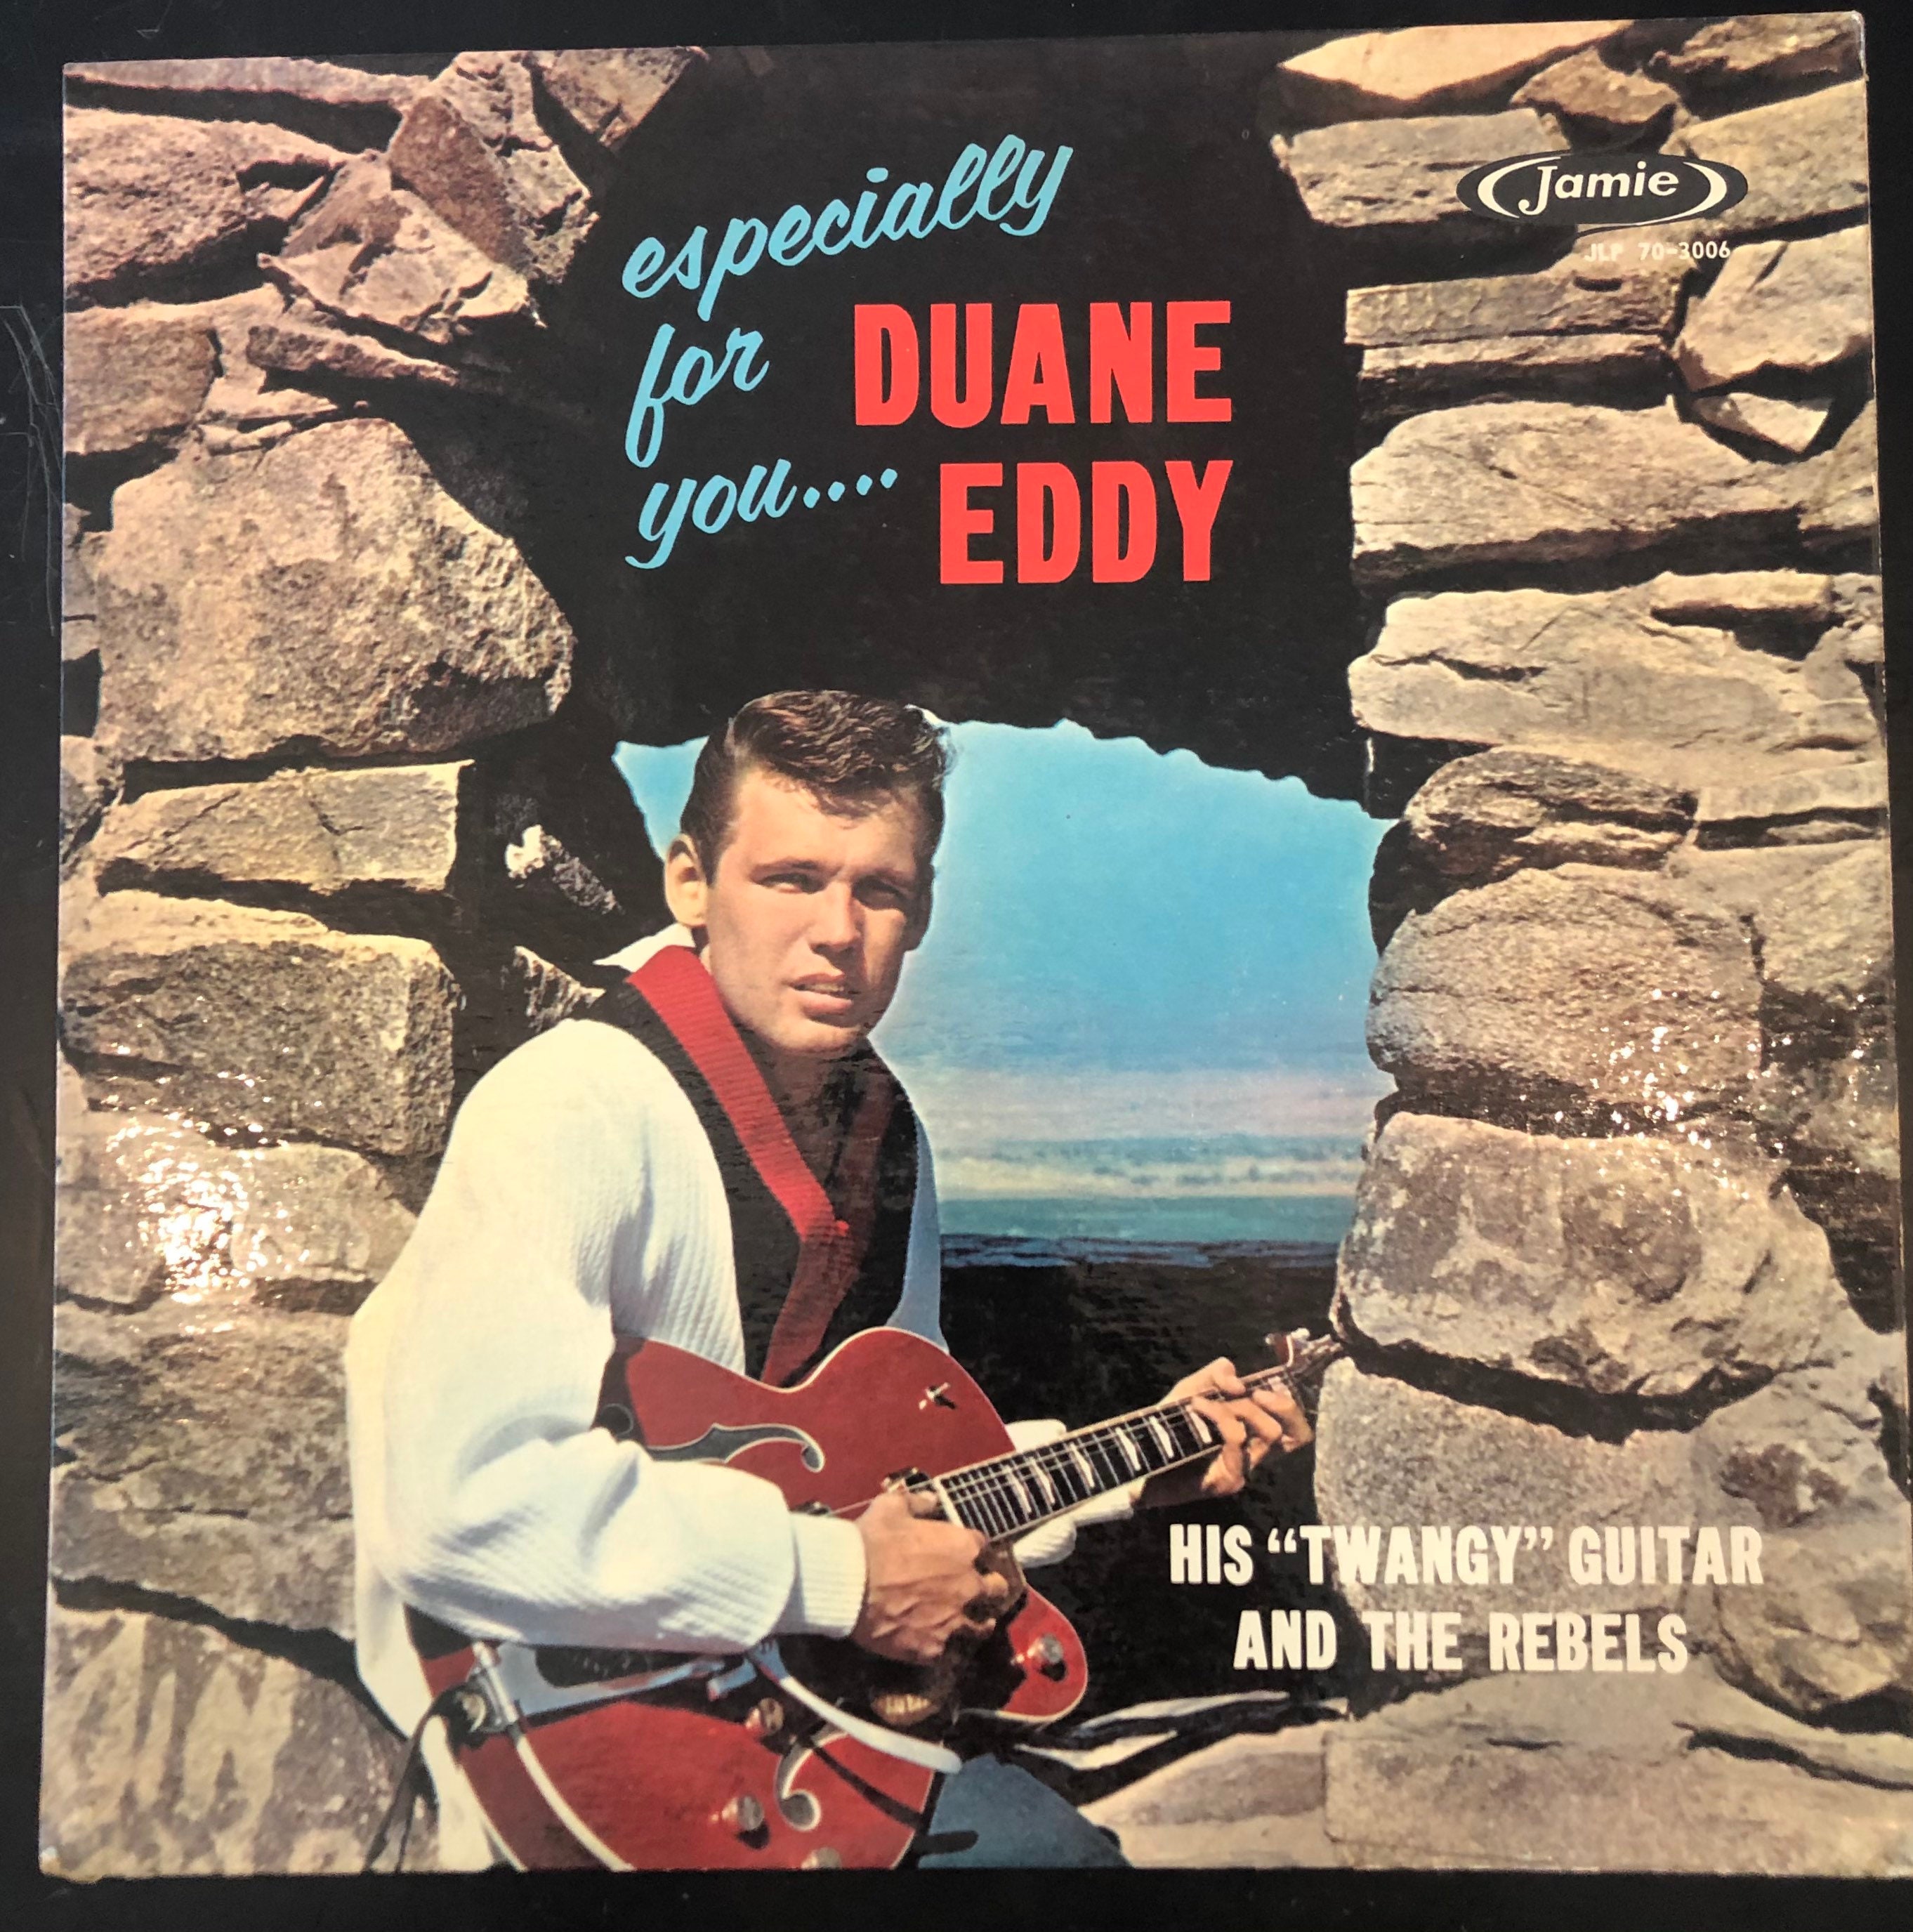 Duane Eddy His Twangy Guitar and the Rebels Especially for You Mono Jamie JLP 70-3006 1959 - Etsy